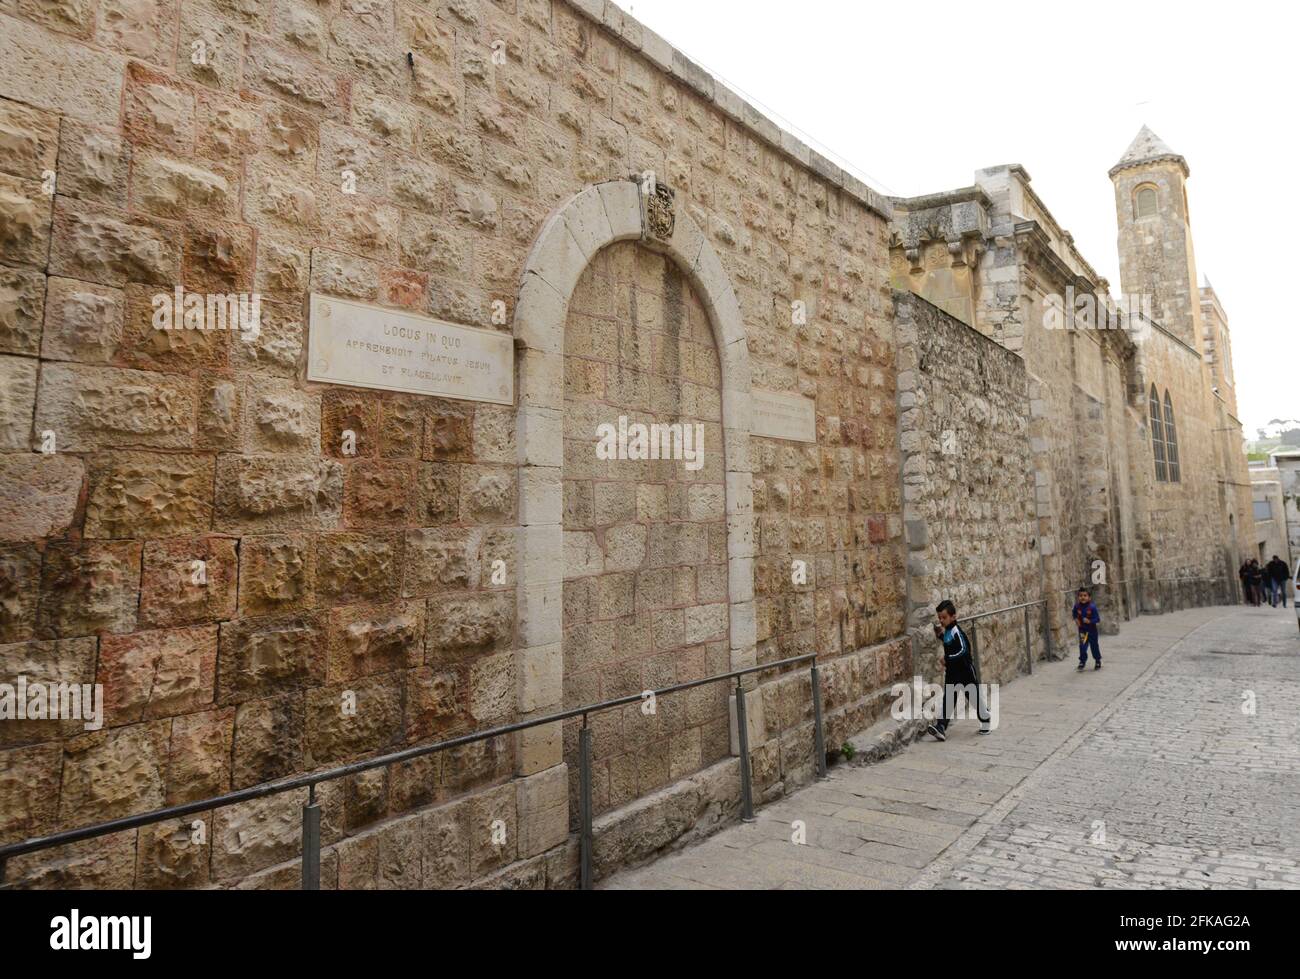 Old monasteries on Lions gate street in the old city of Jerusalem. Stock Photo